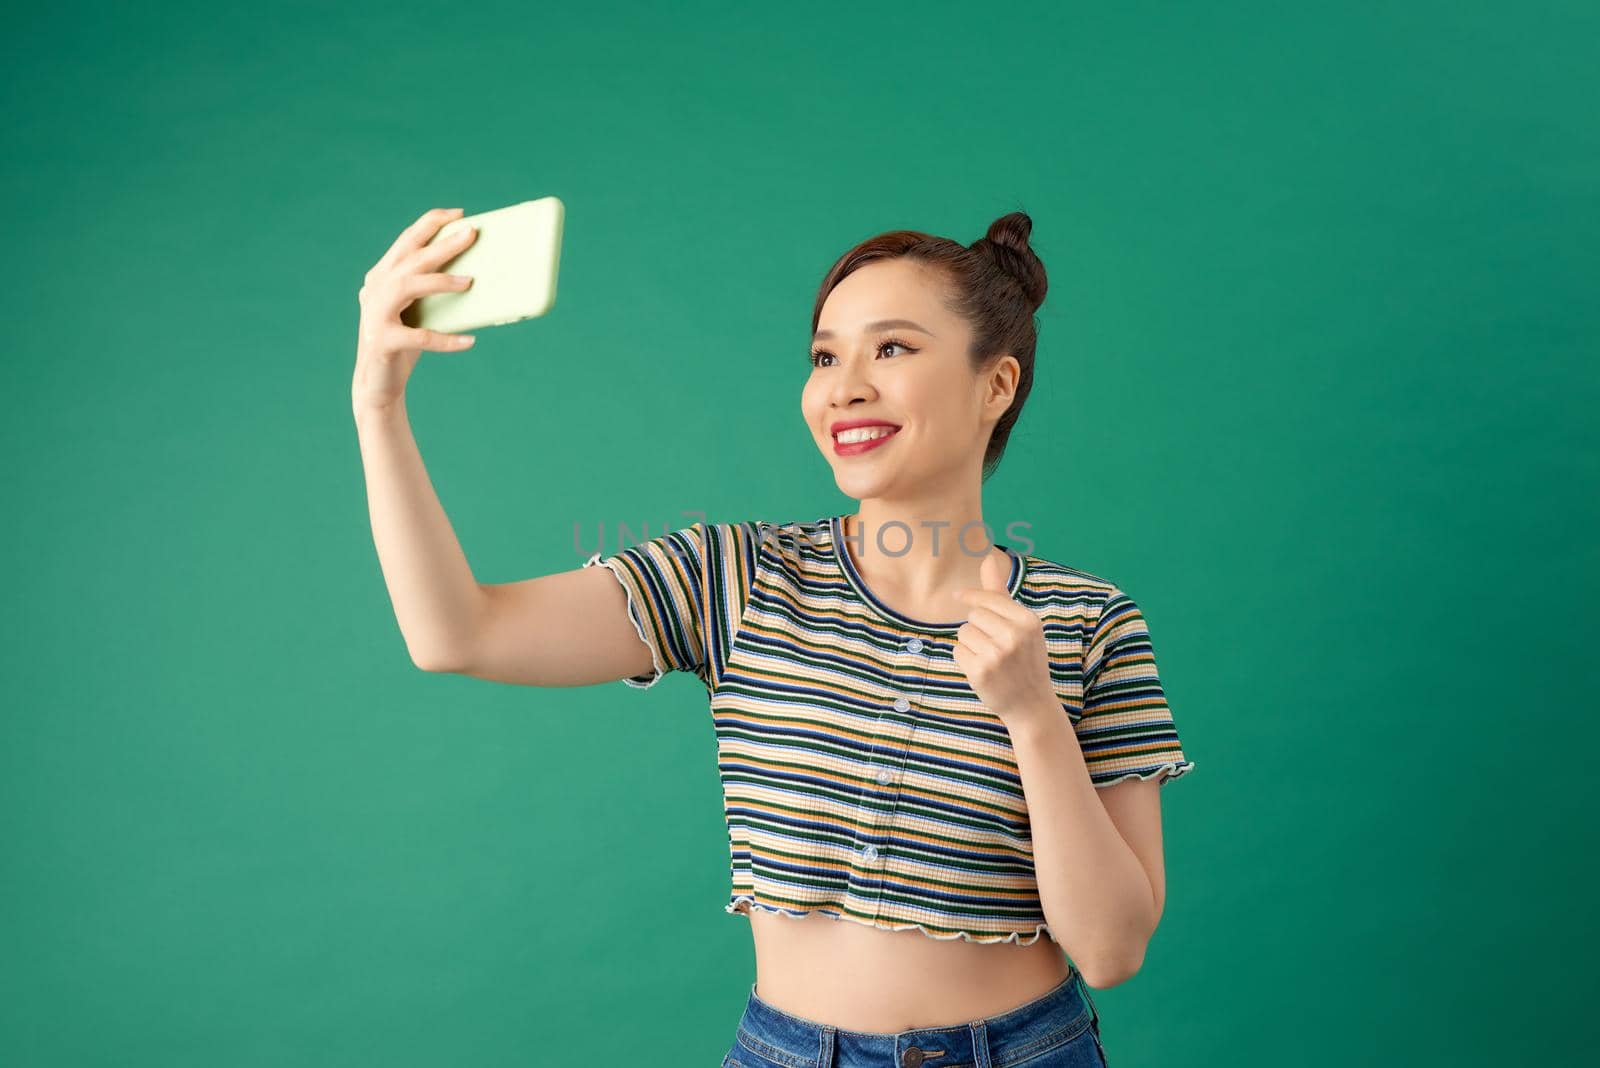 Portrait of young Asian female making selfie photo on smartphone with postitive expression over green background.